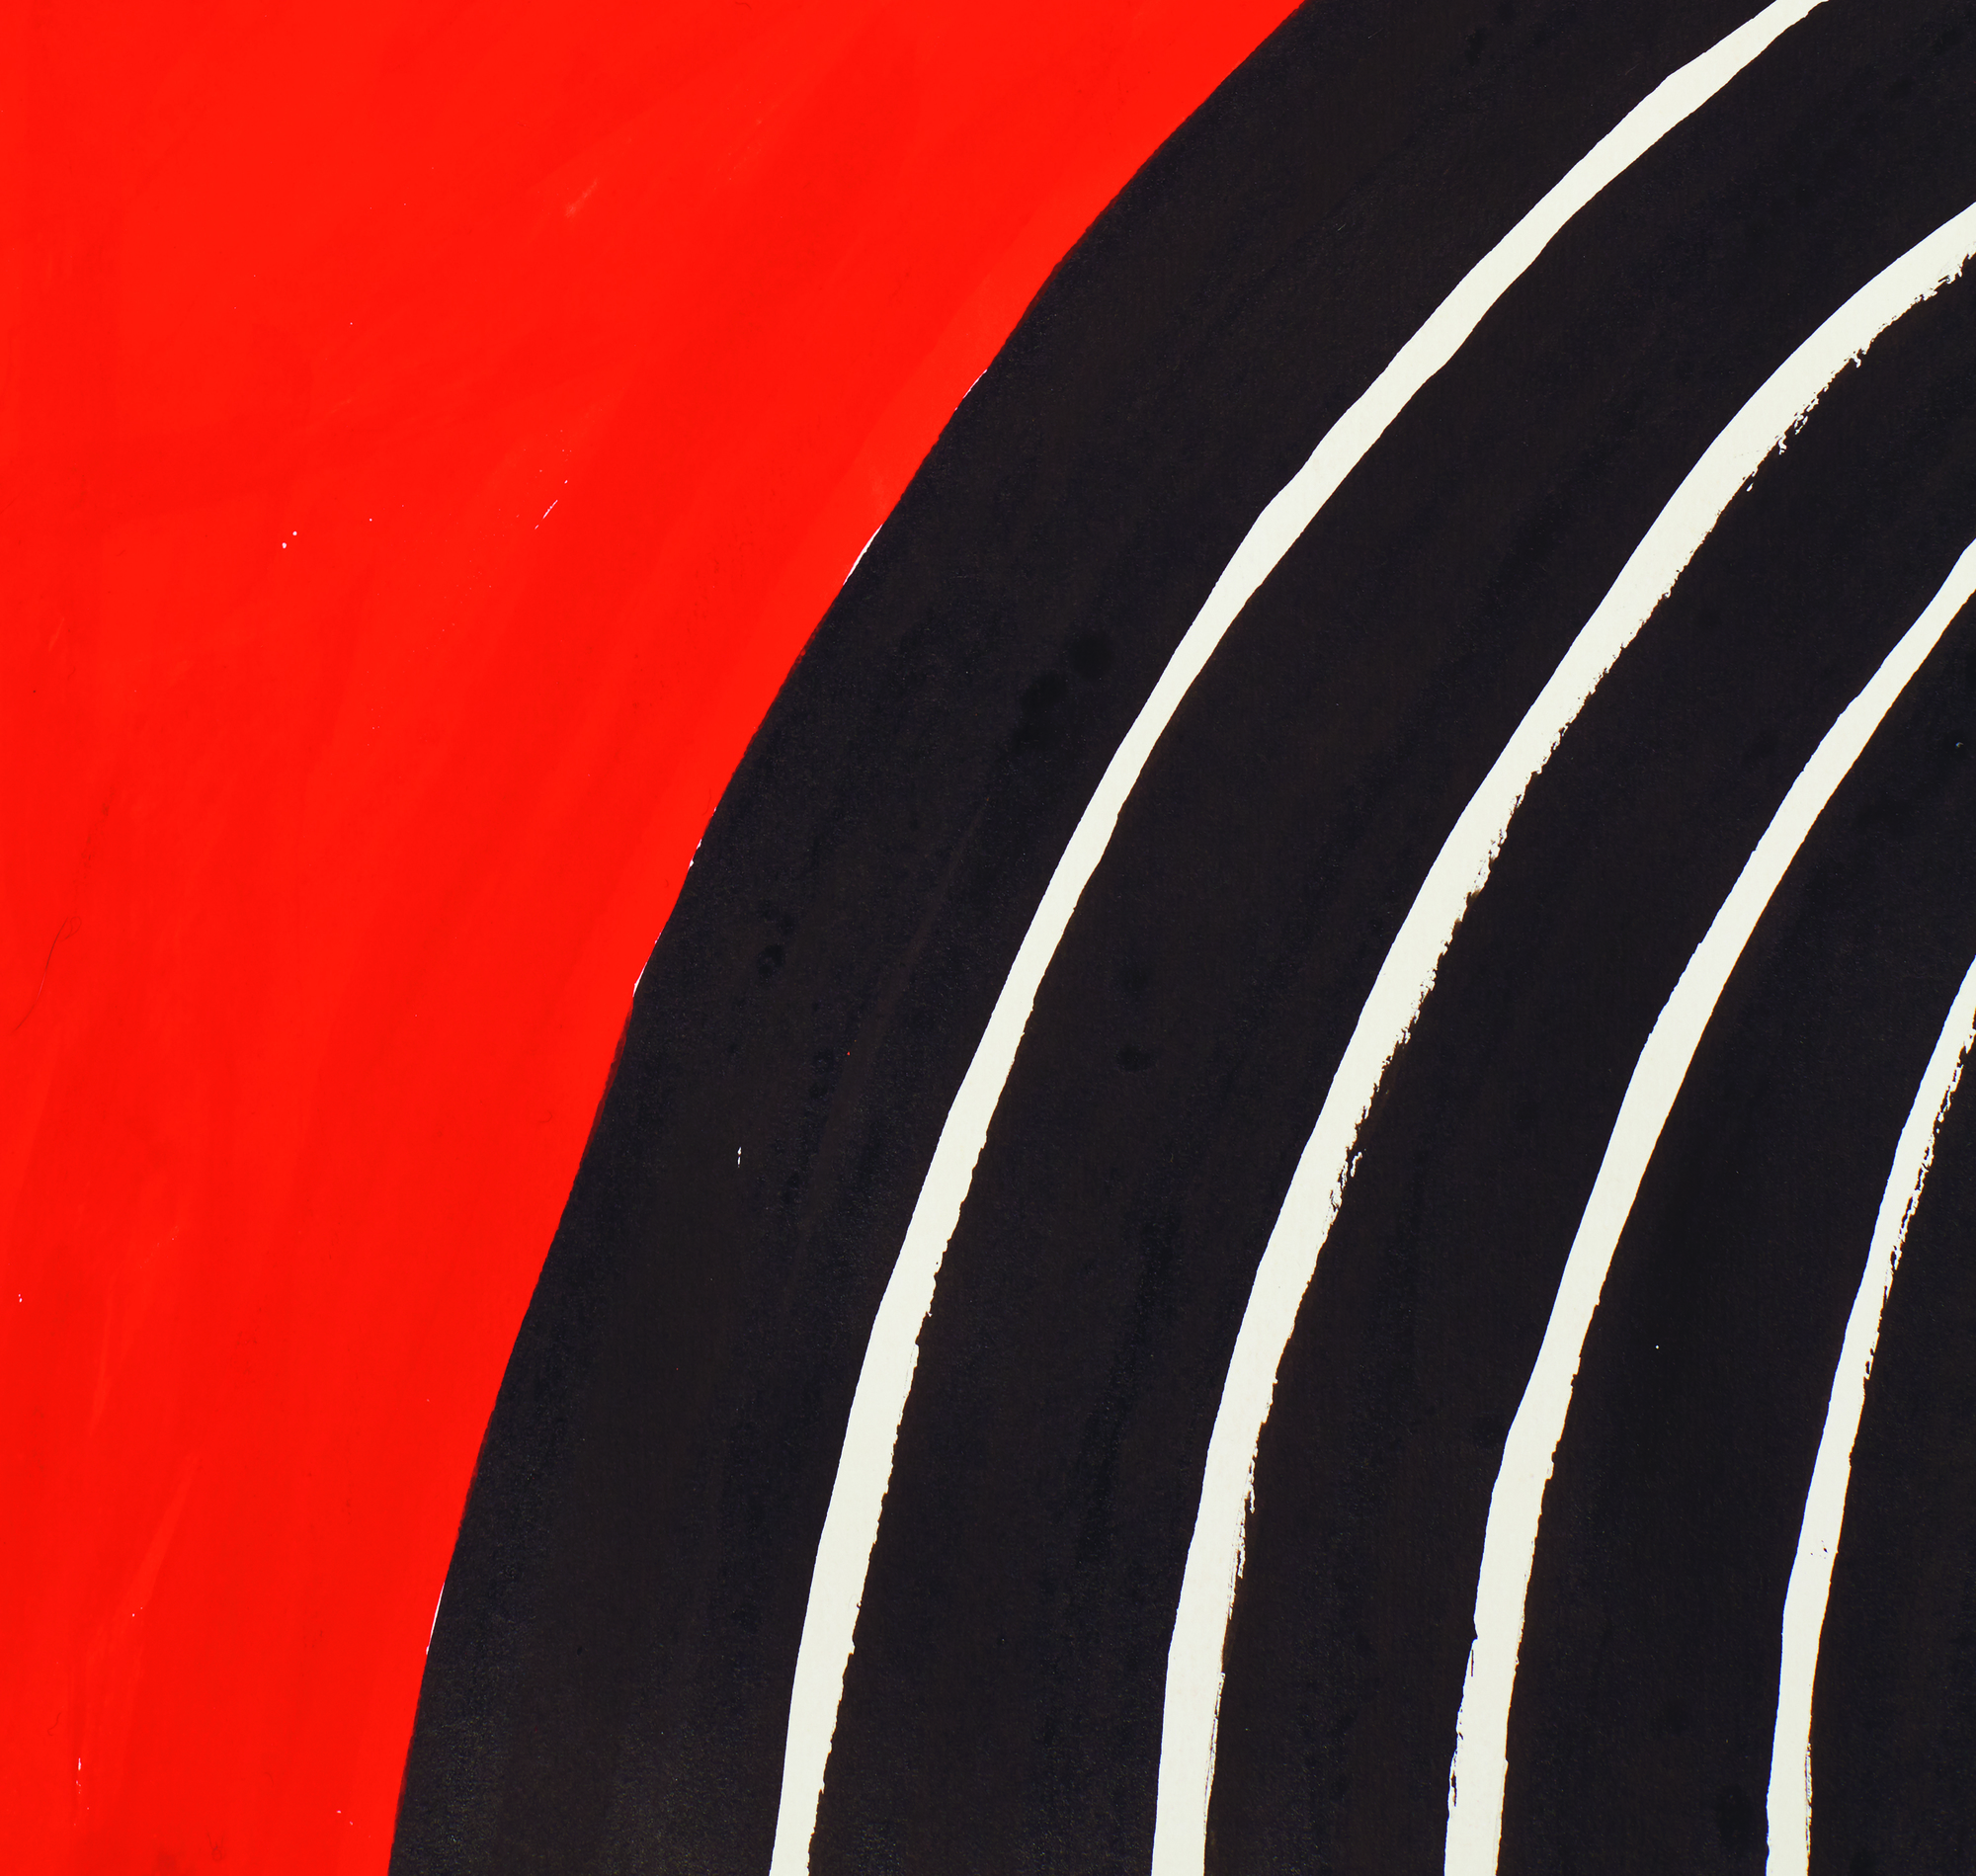 ALEXANDER CALDER - The Oval Spiral - gouache and ink on paper - 43 1/4 x 29 1/2 in.